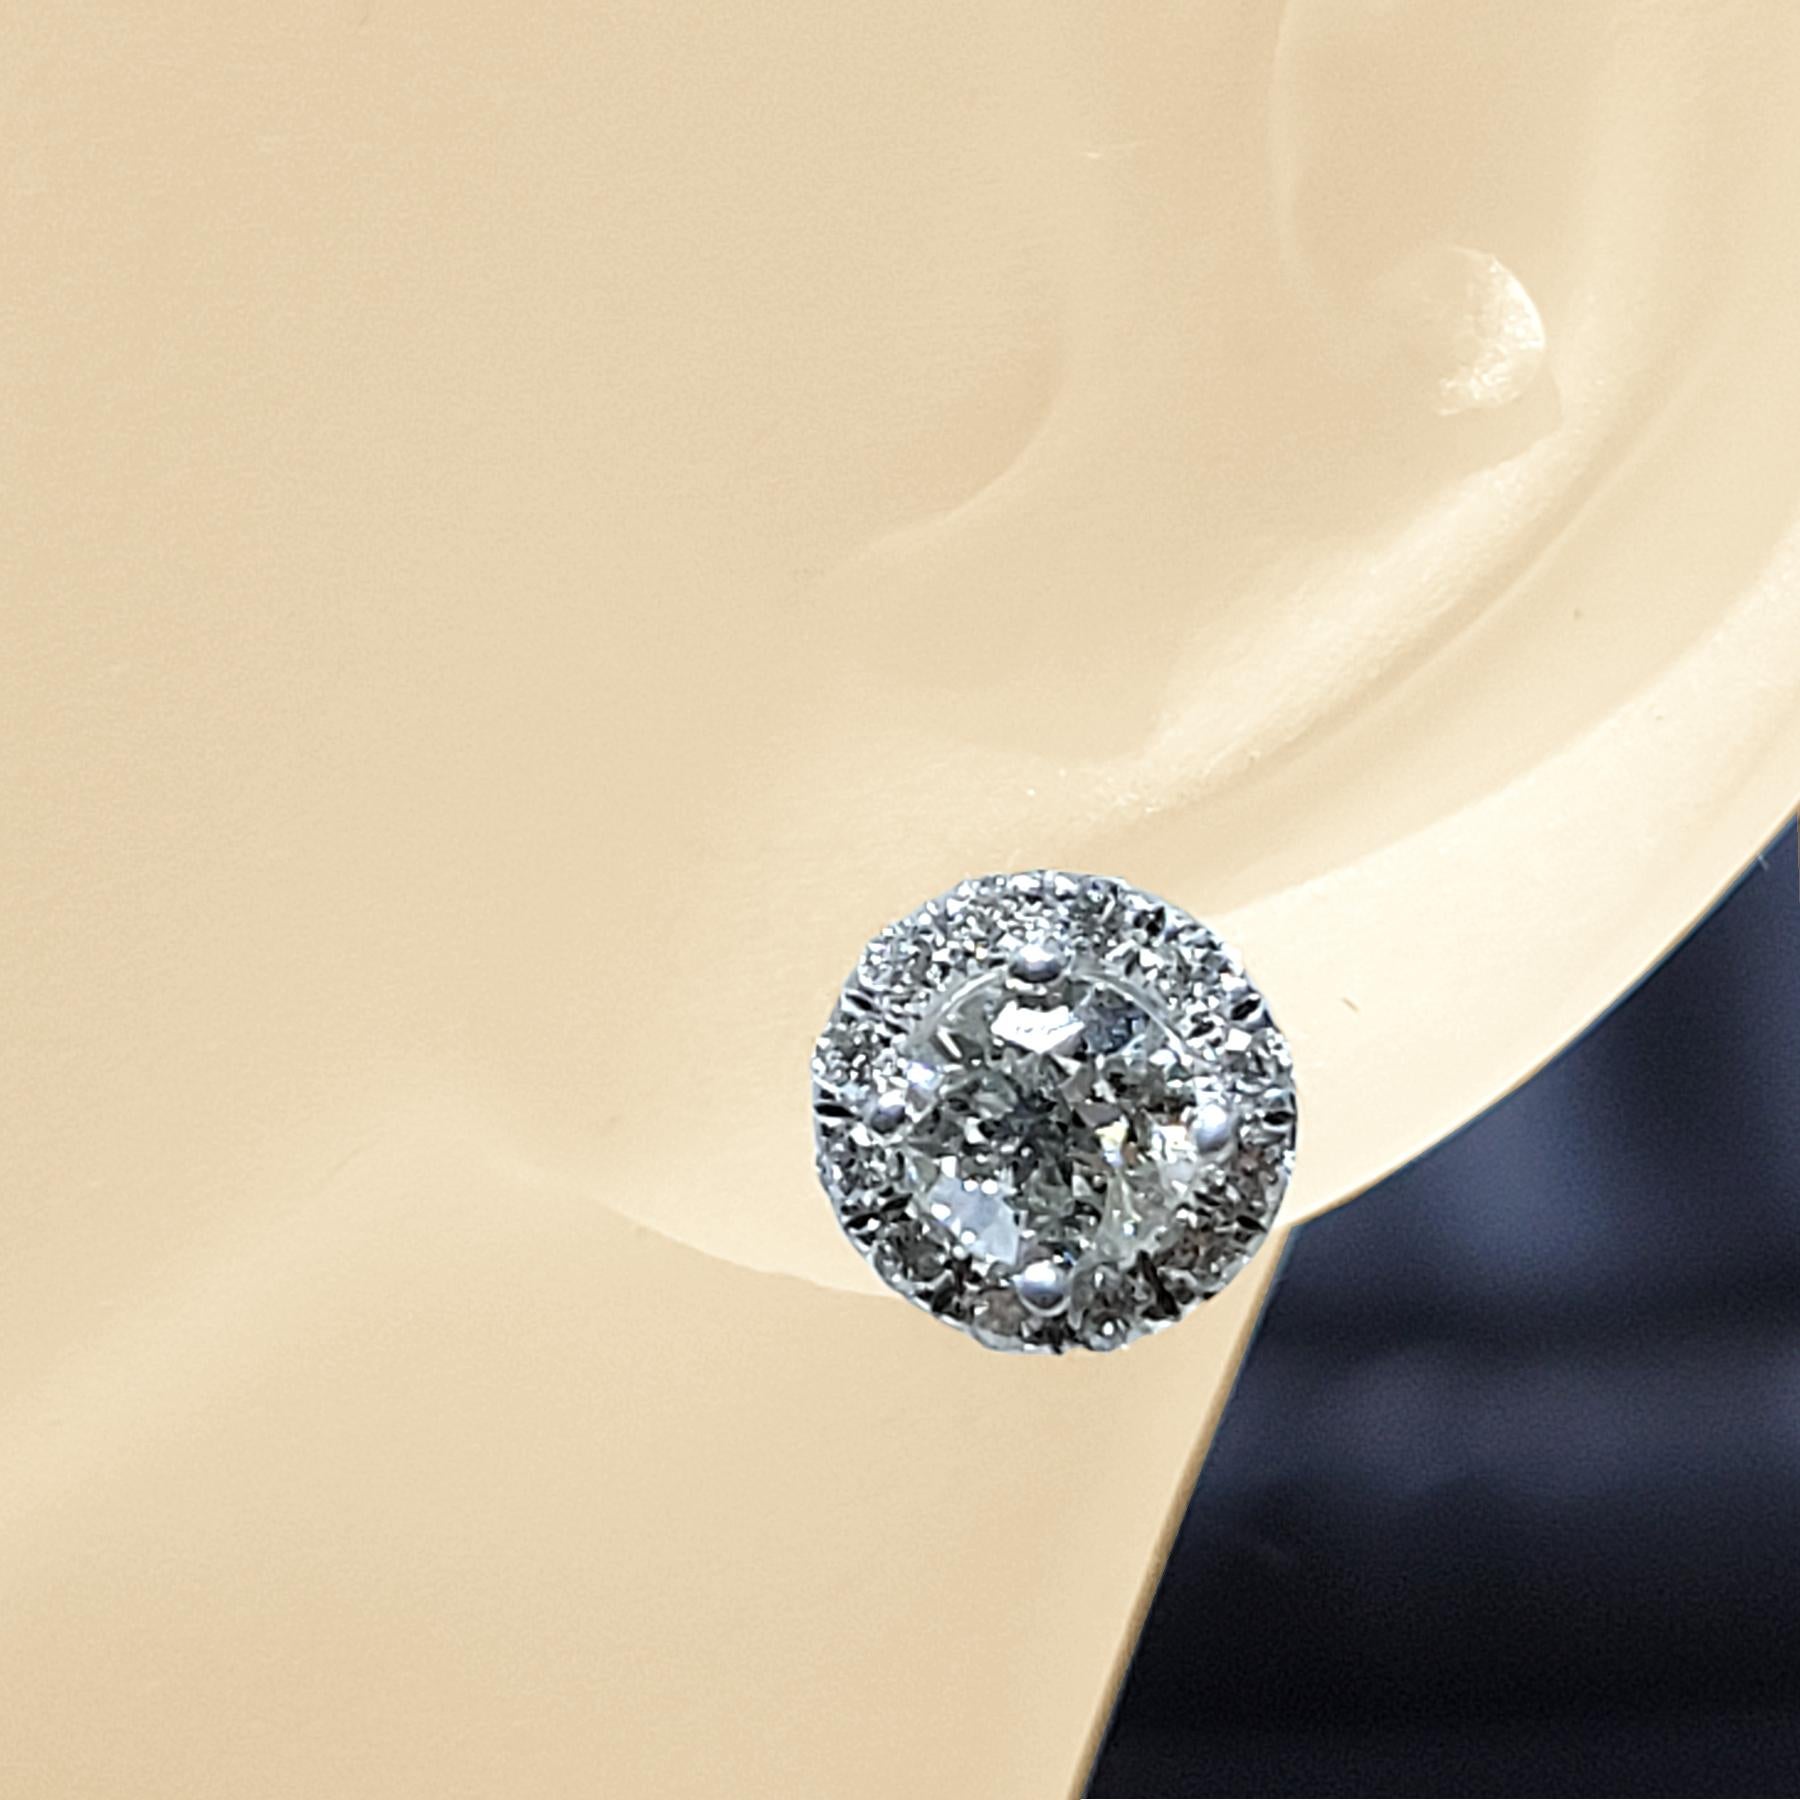 This beautiful pair of earrings is made in 14K Gold with a pair of Round Brilliant Diamonds with total weight of 1.00 Ct in the center of a Pave Set Halo with 30 pieces of 1.1 mm Round Brilliant diamonds. Diameter: 8 mm
Total Diamond weight is 1.27